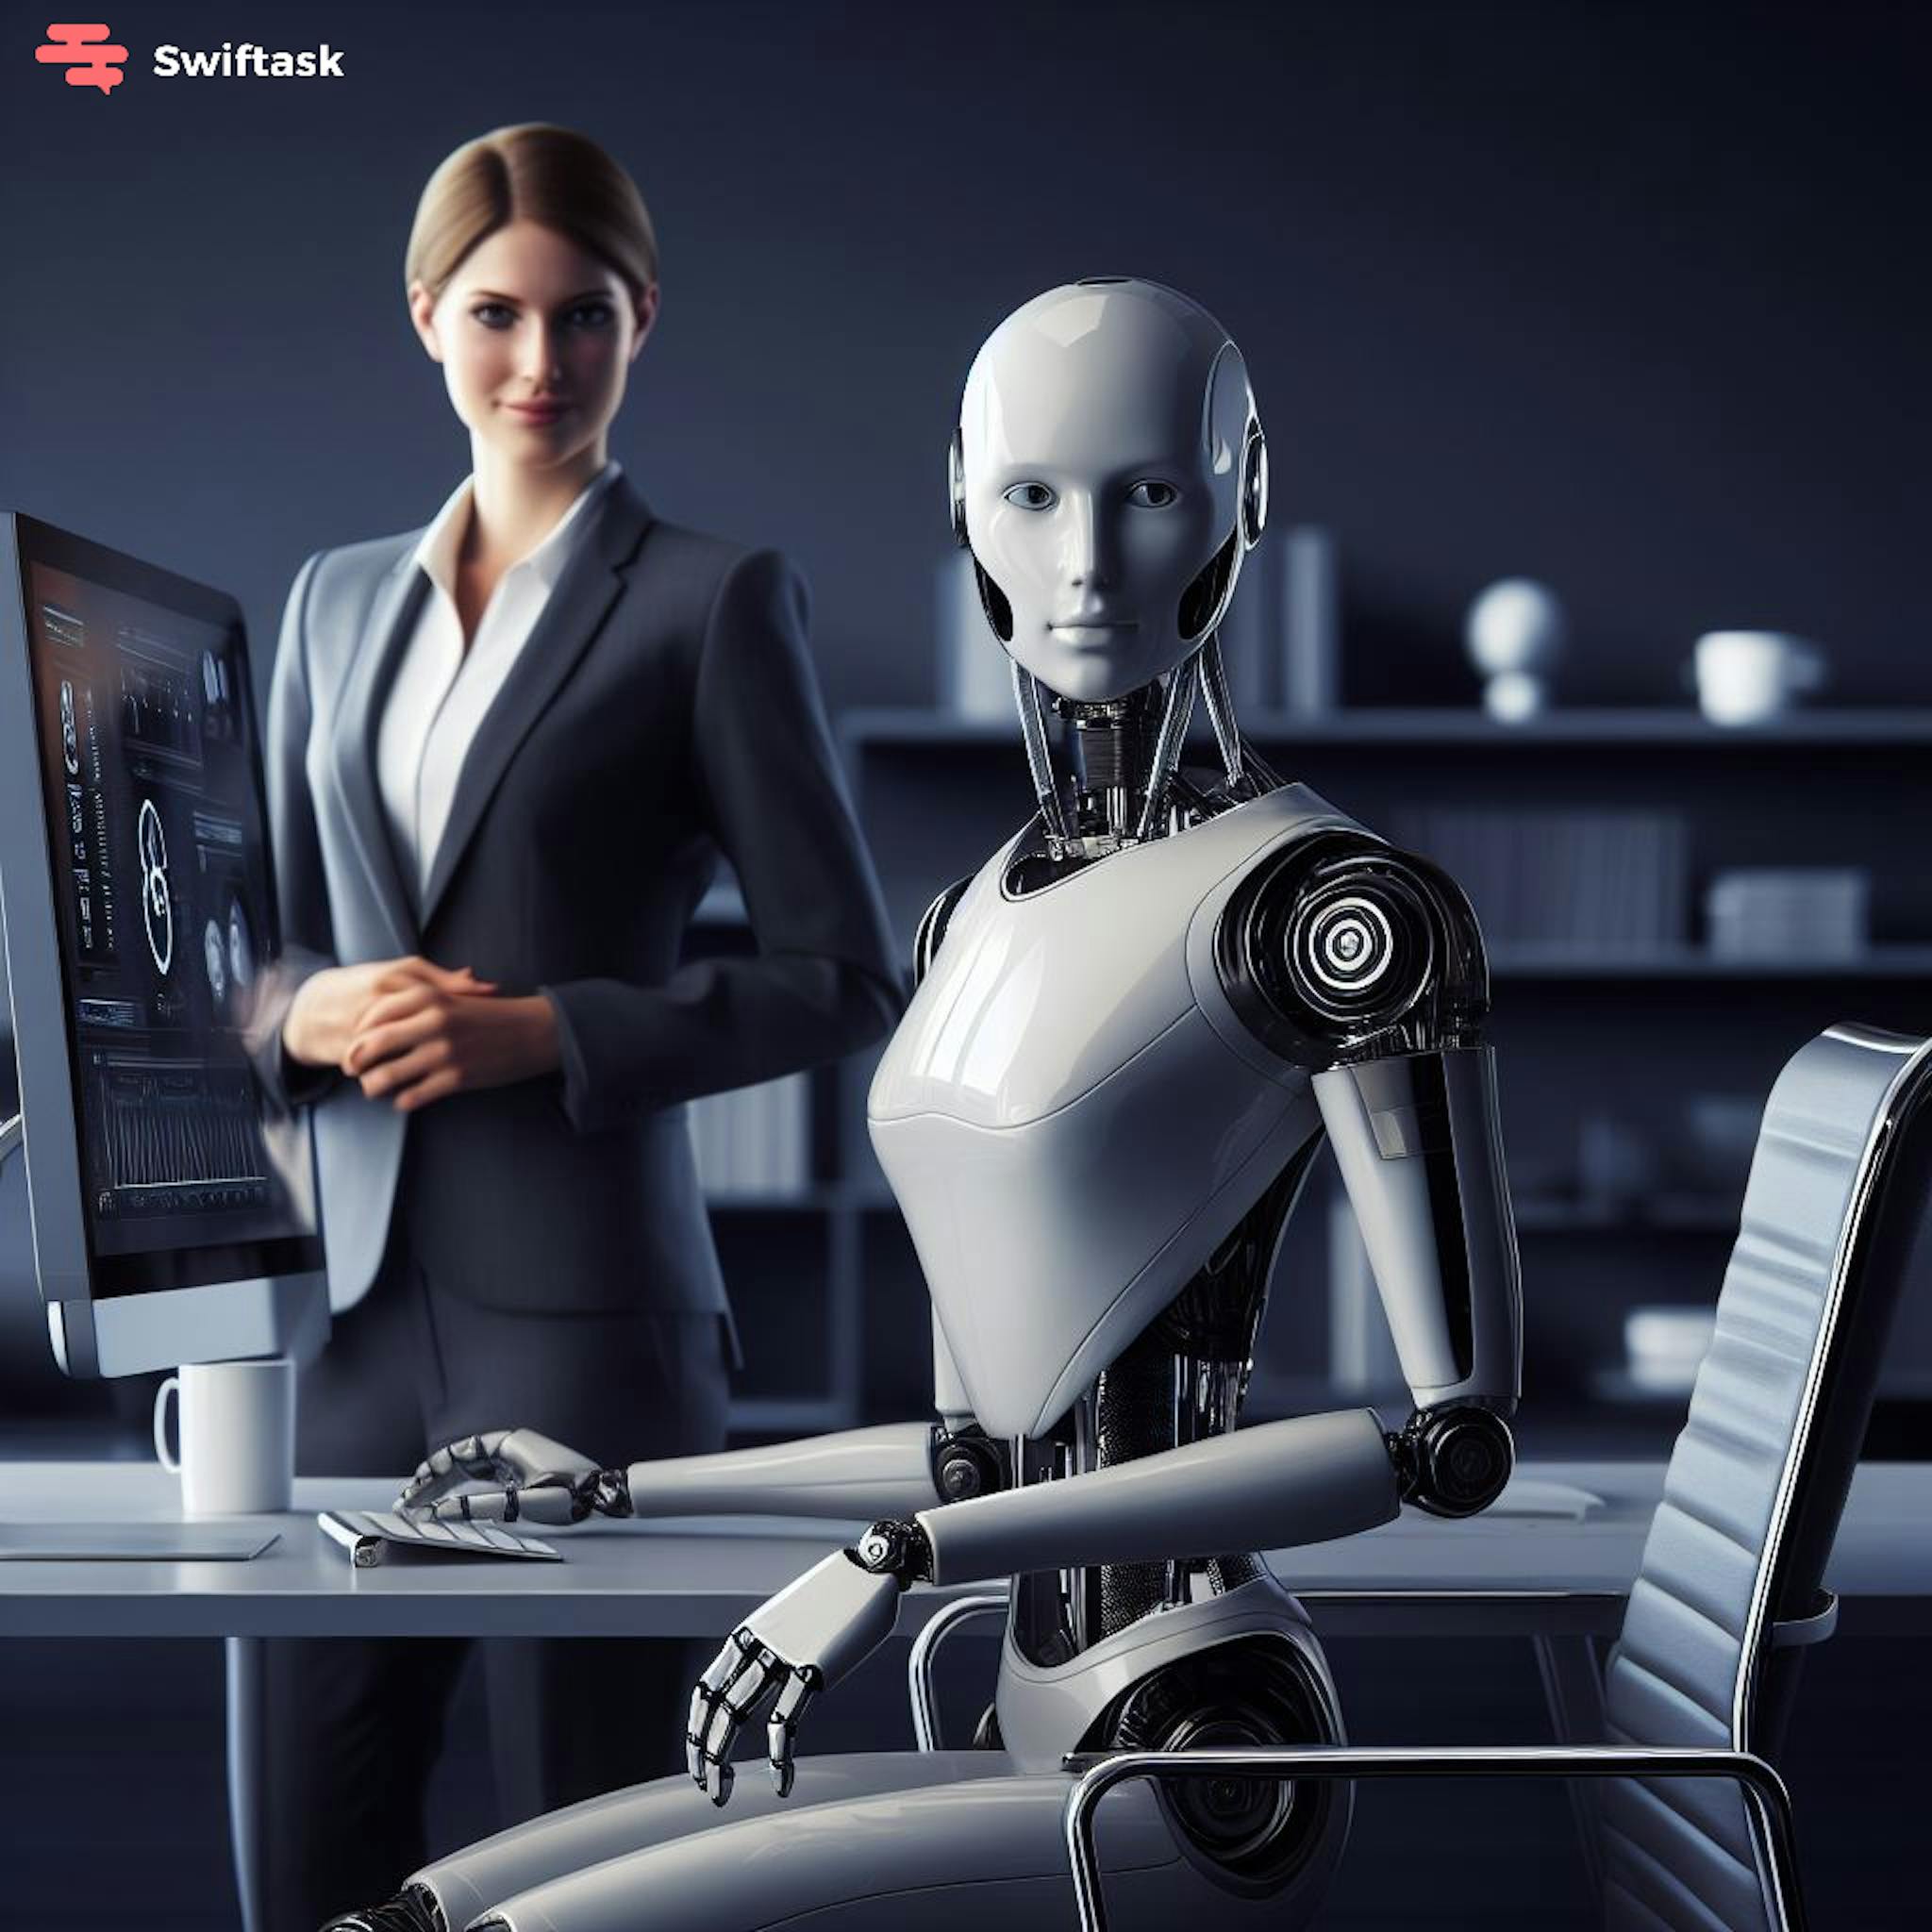 An impressively realistic AI-powered aristic robot sits confidently at a sleek desk in front of computer on the right, while a woman in a sophisticated suit stands proudly behind it, exuding professionalism and pride